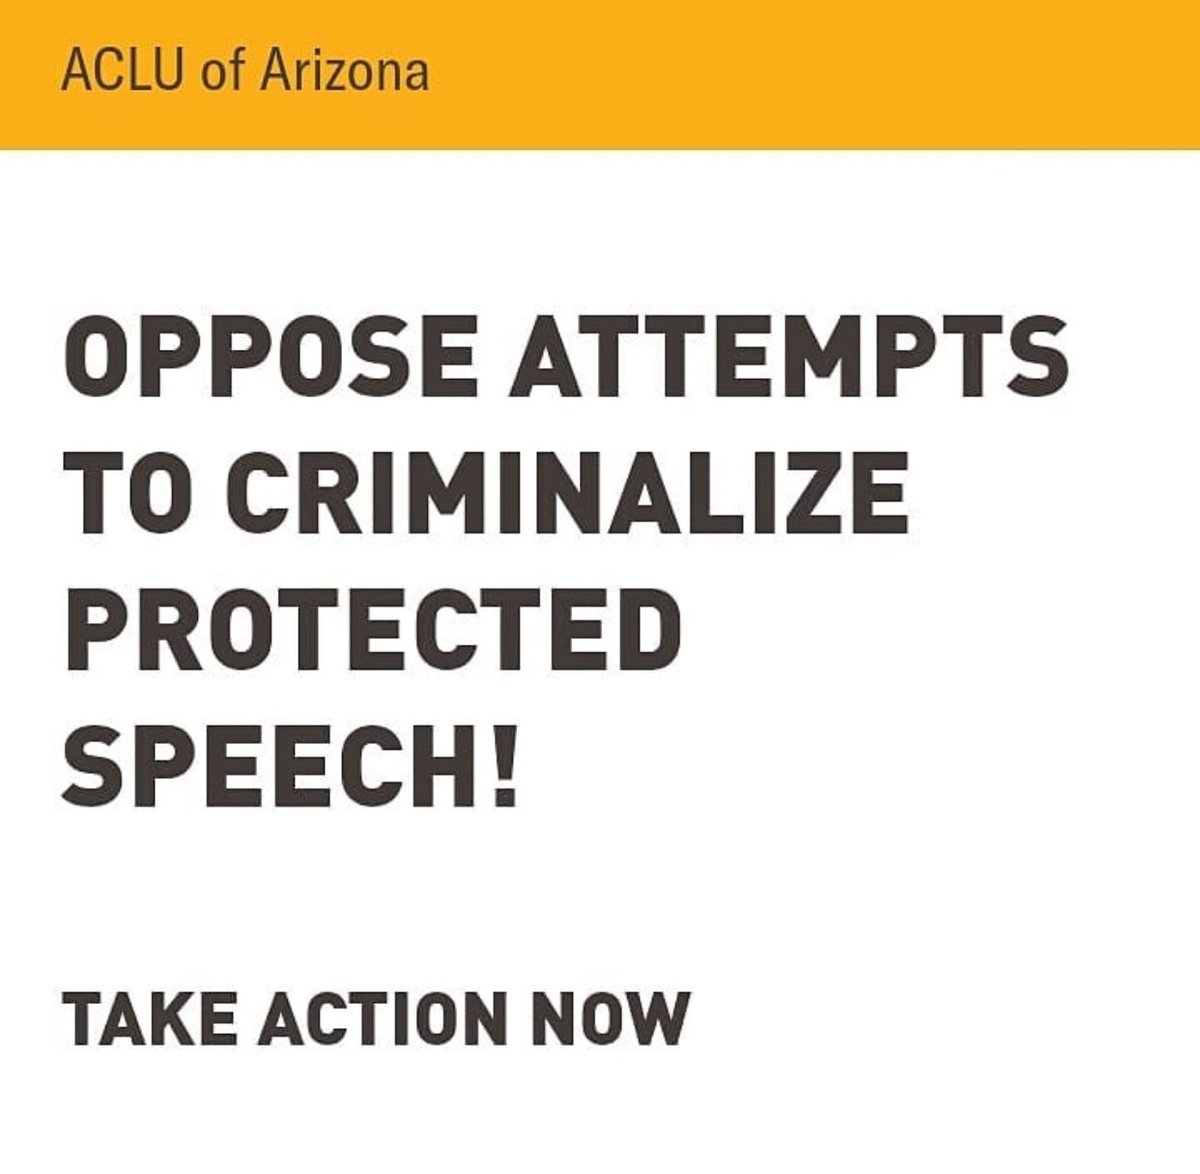 The AZ senate house is ready to vote on the SB1143 which classifies “criticizing Israel” as an aggravating factor in the Arizona criminal code.

“Example... if you receive a criminal speeding ticket, the punishment could be doubled if you are known of criticizing Israel.”
(1/2)